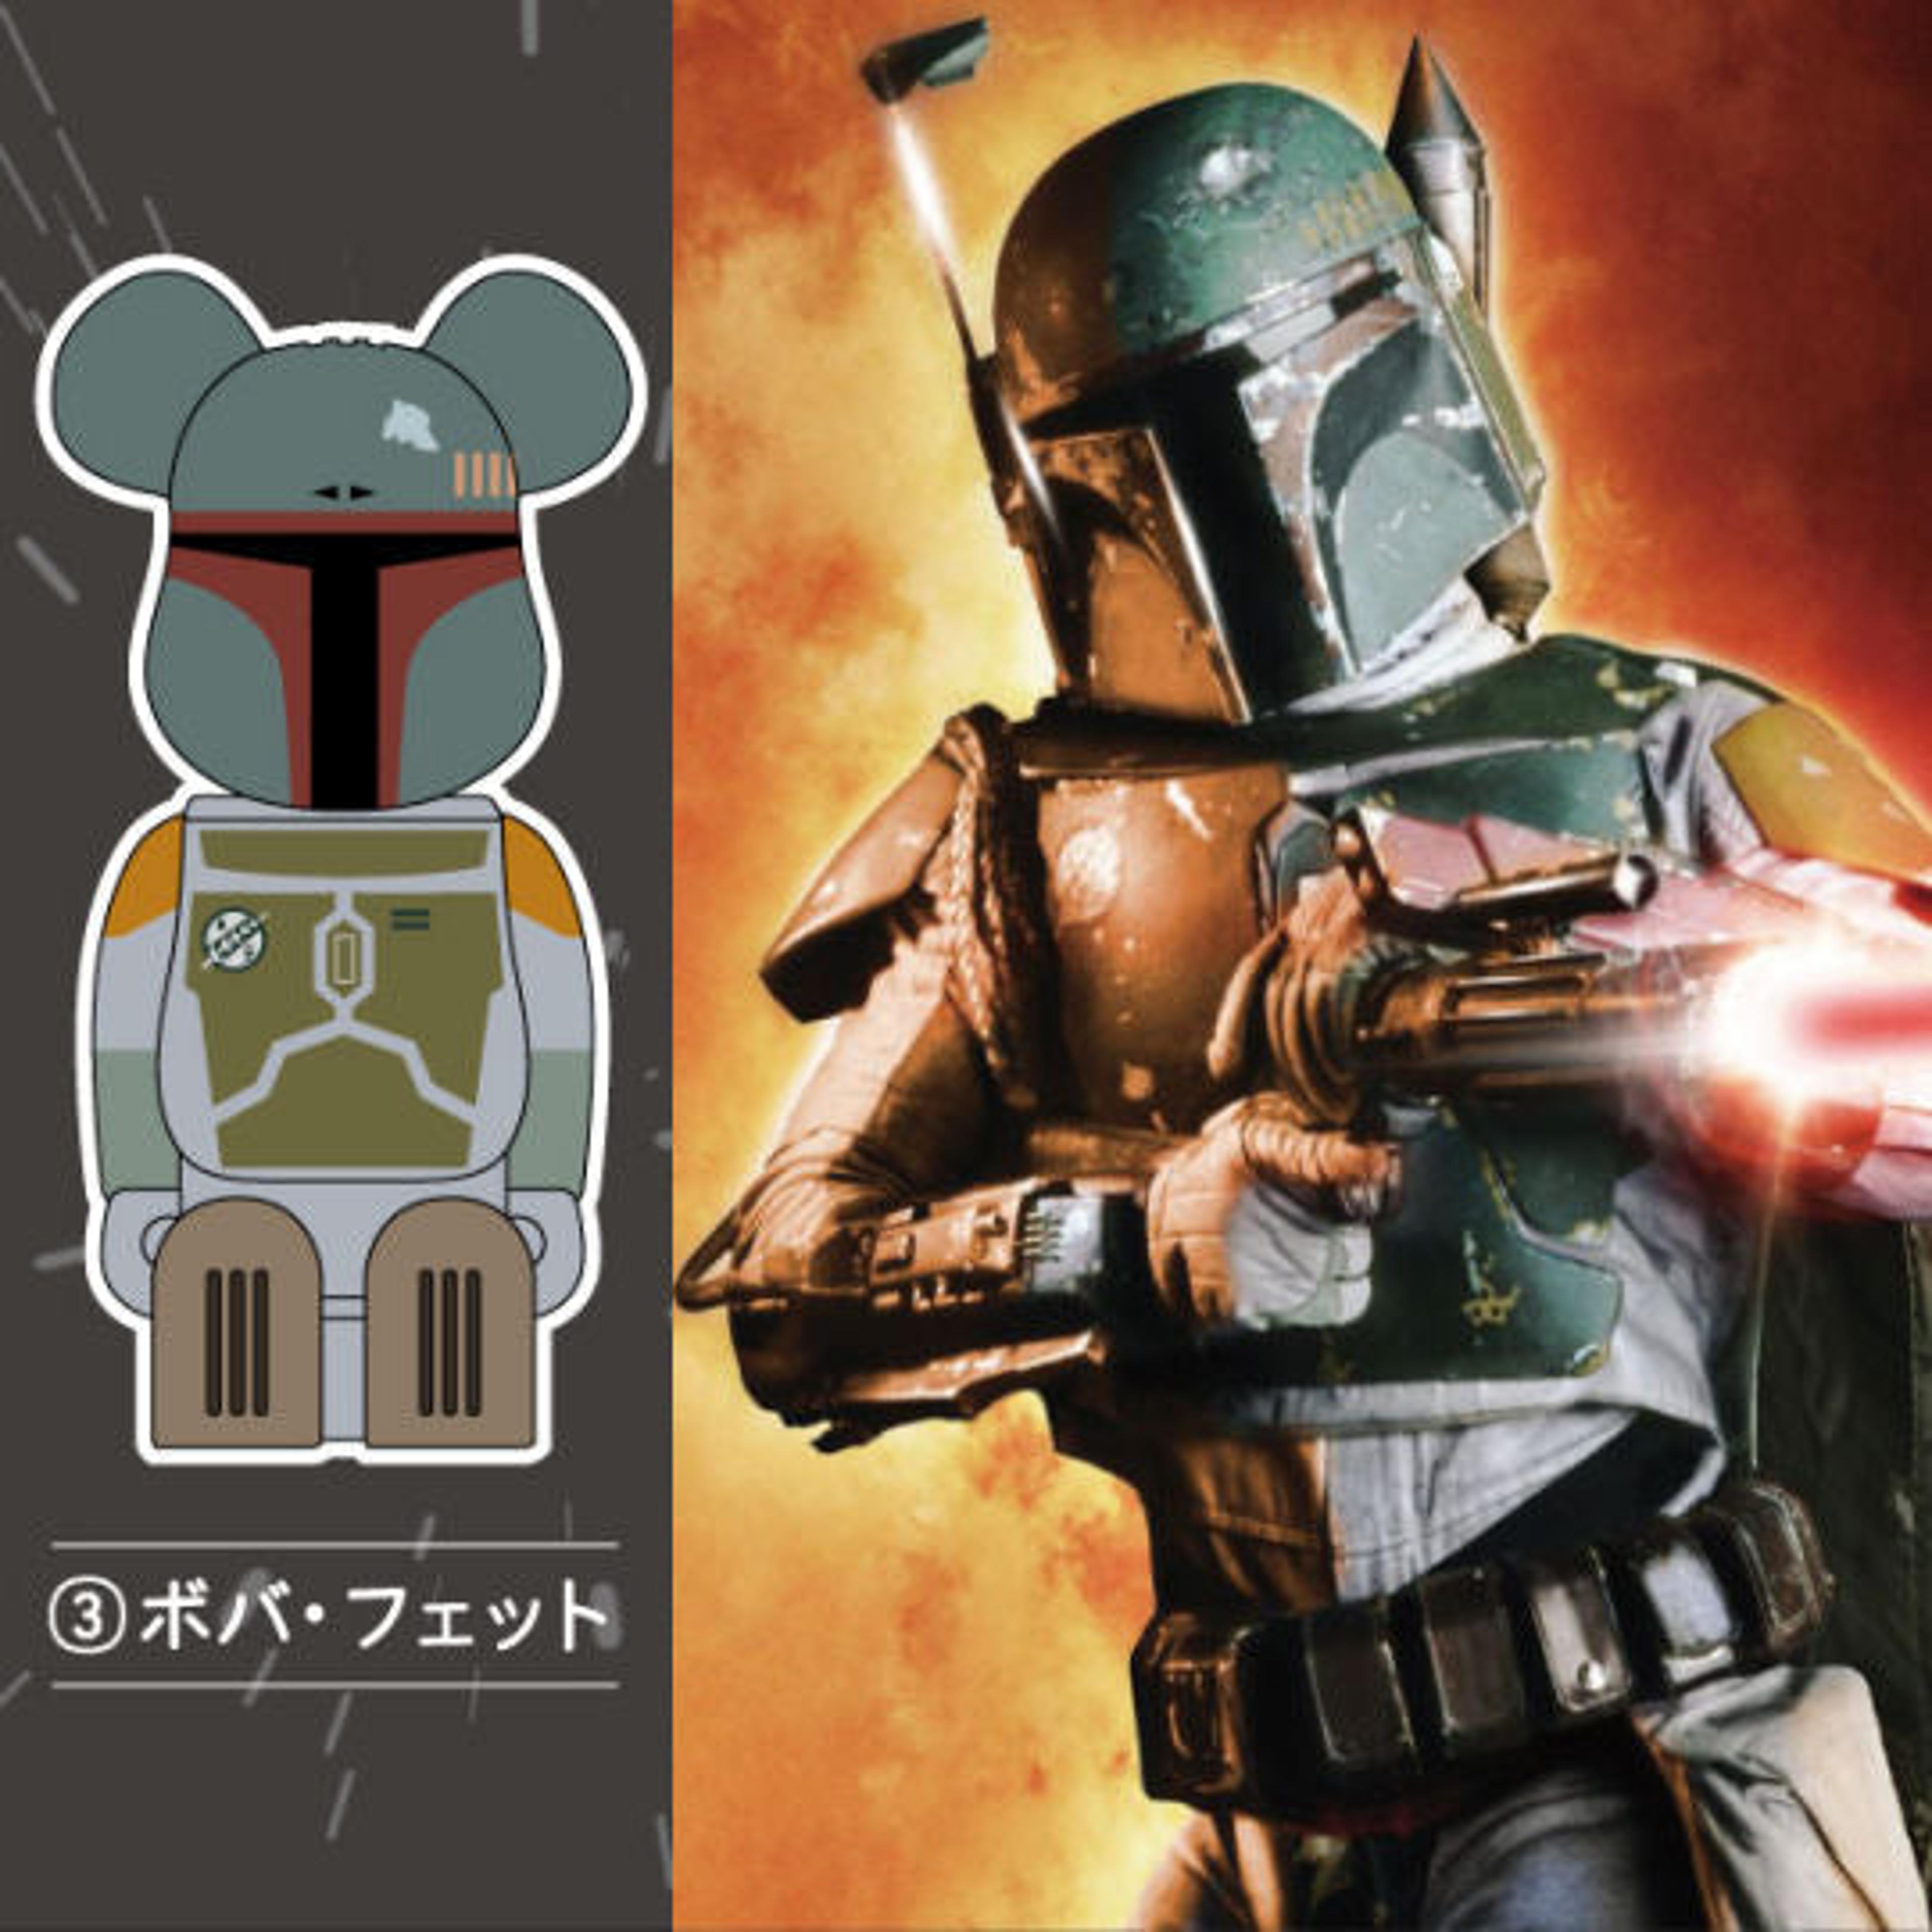 Alternate View 1 of Medicom Toy BE＠RBRICK Cleverin Star Wars 6 Piece Compete Set L